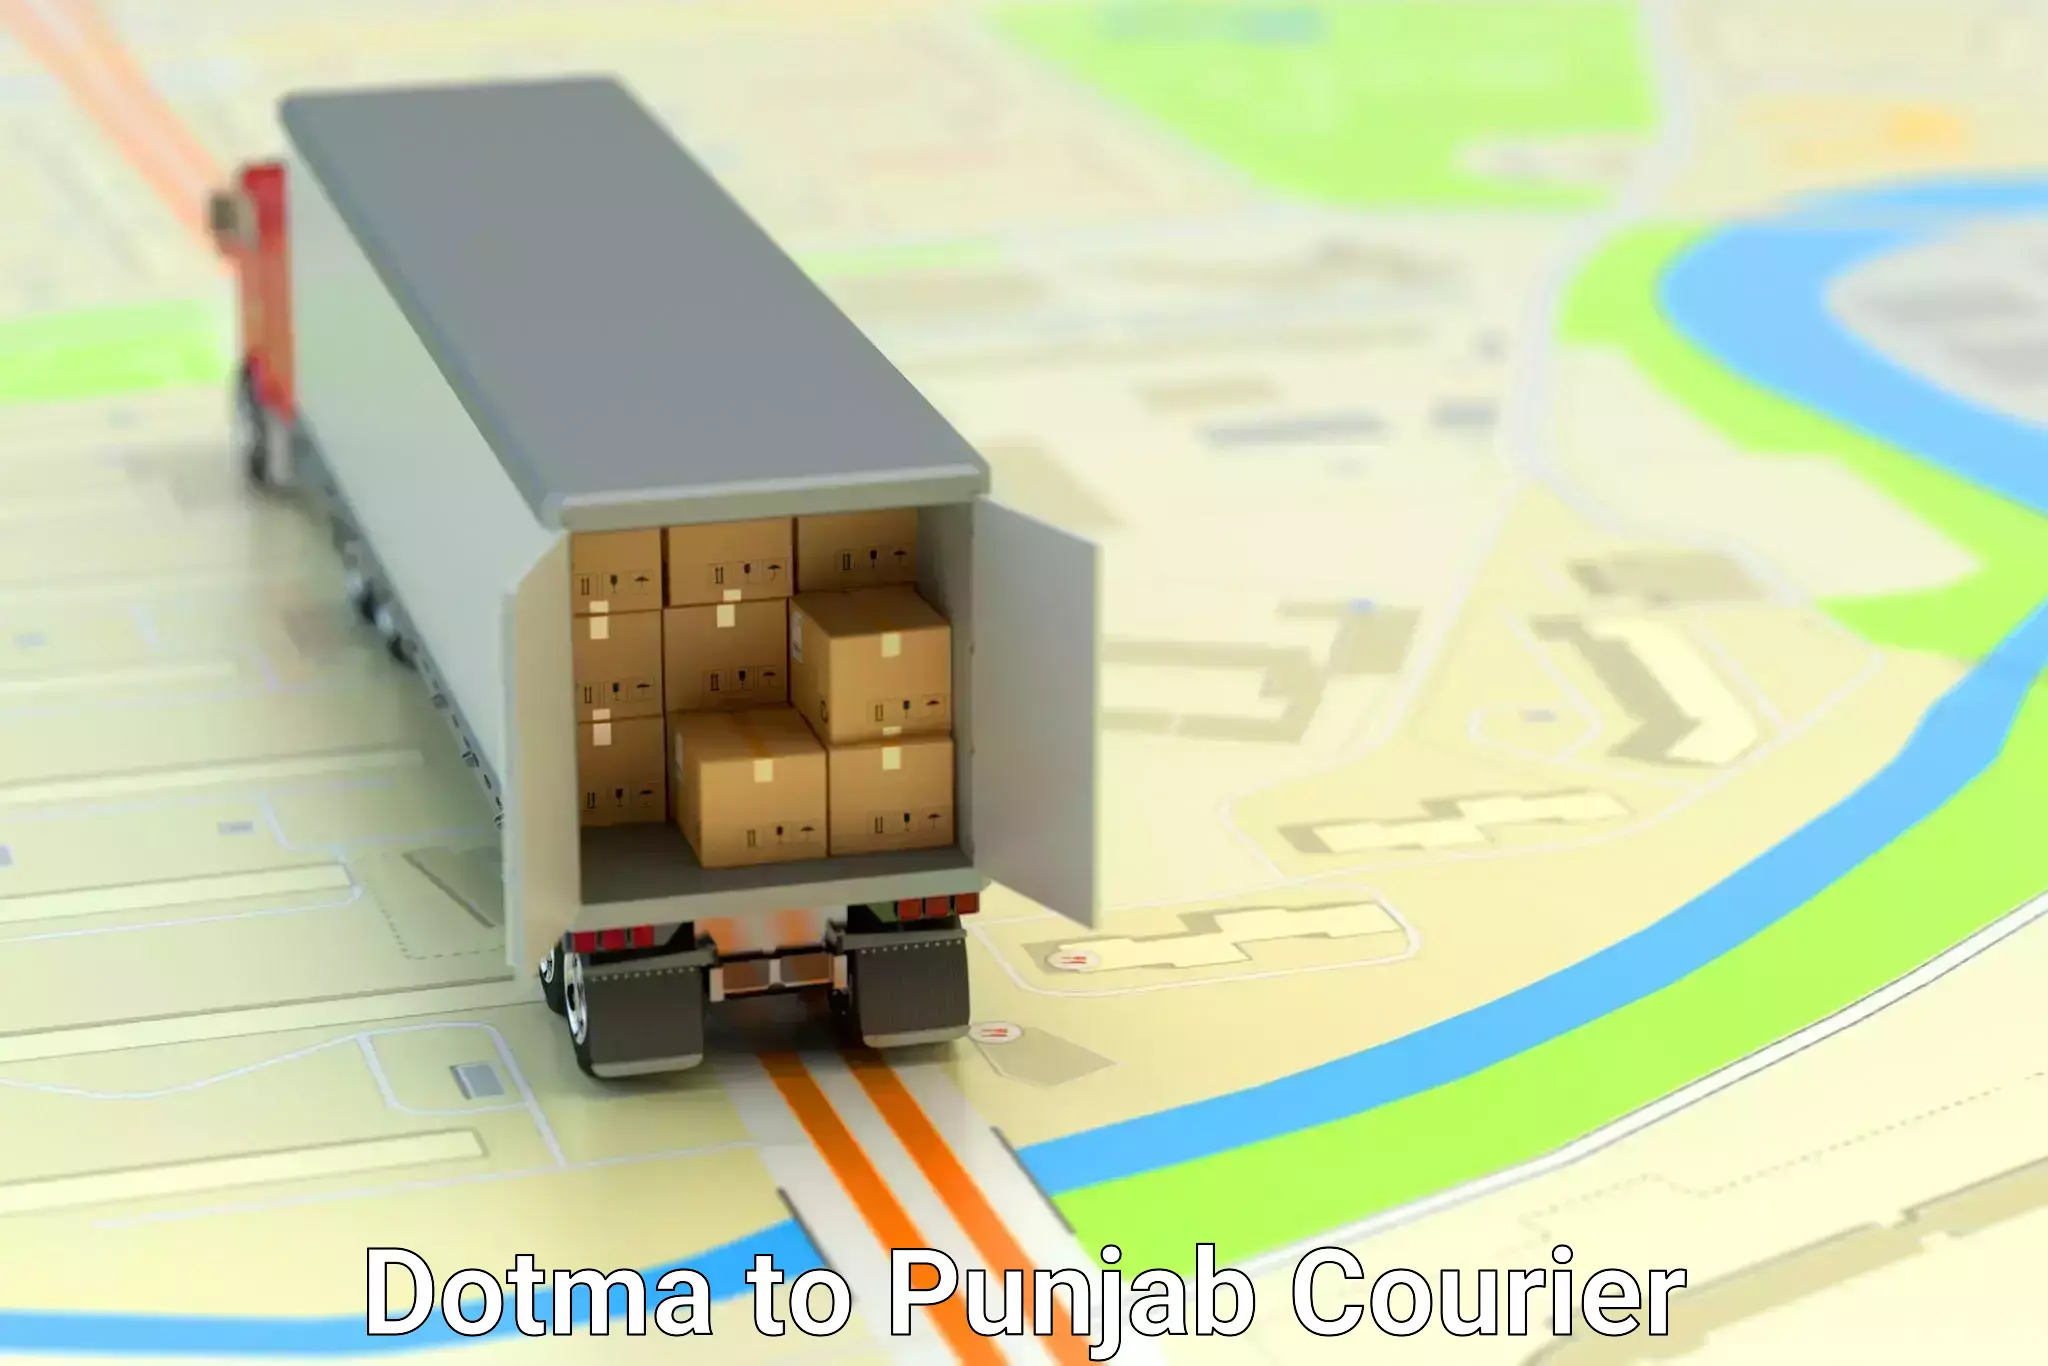 Fast delivery service in Dotma to Punjab